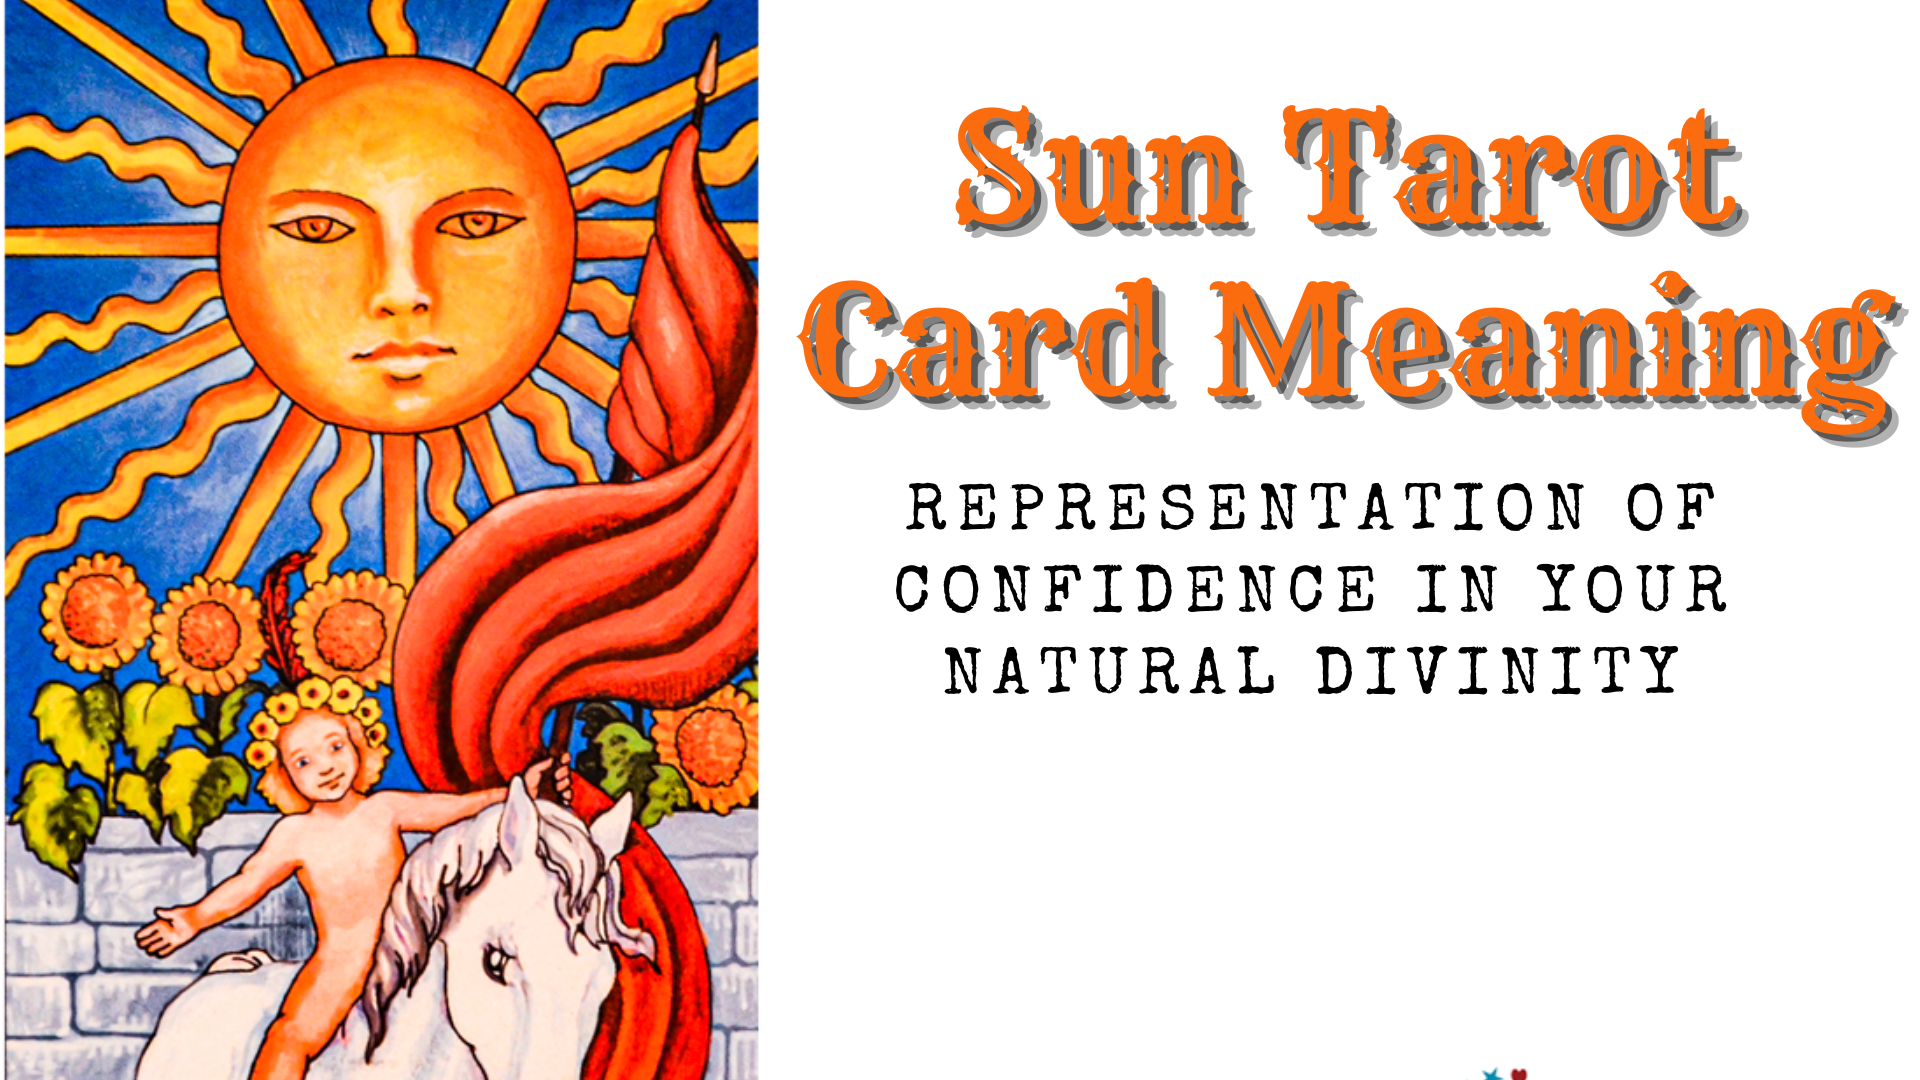 Sun Tarot Card Meaning - Representation Of Confidence In Your Natural Divinity